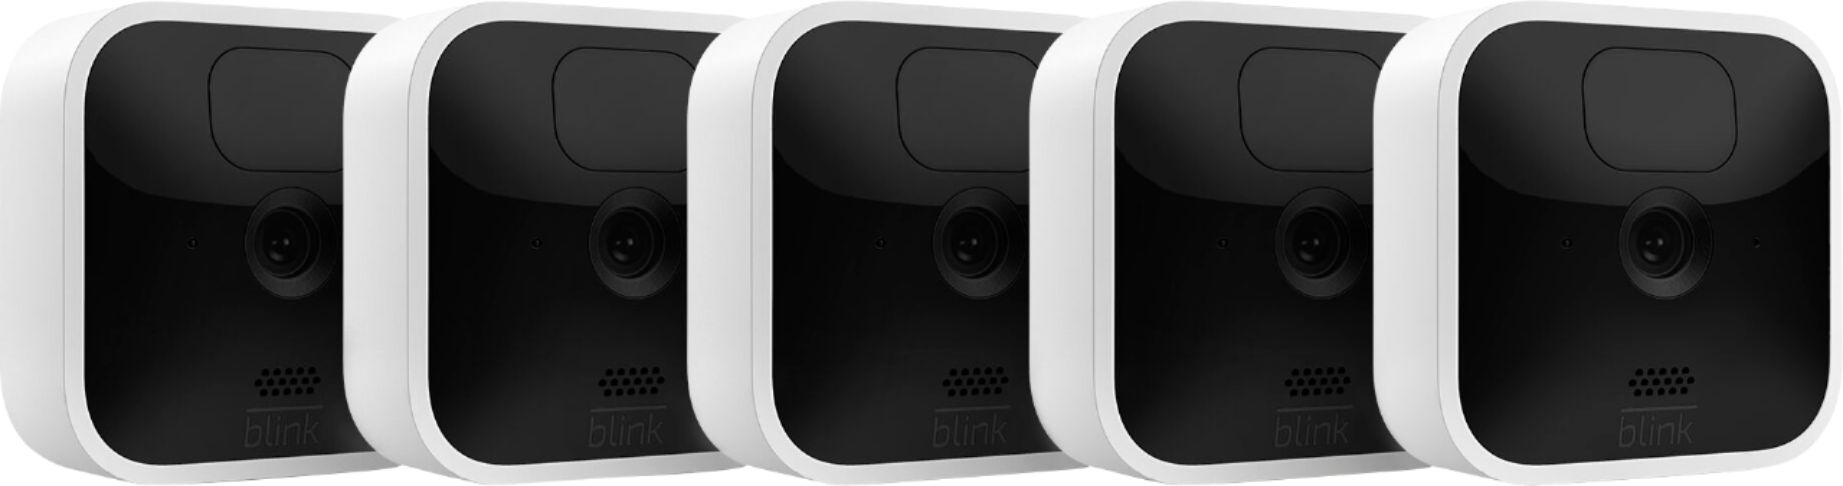 Blink - Indoor 5 Camera System – wireless, HD security camera with two-year battery life